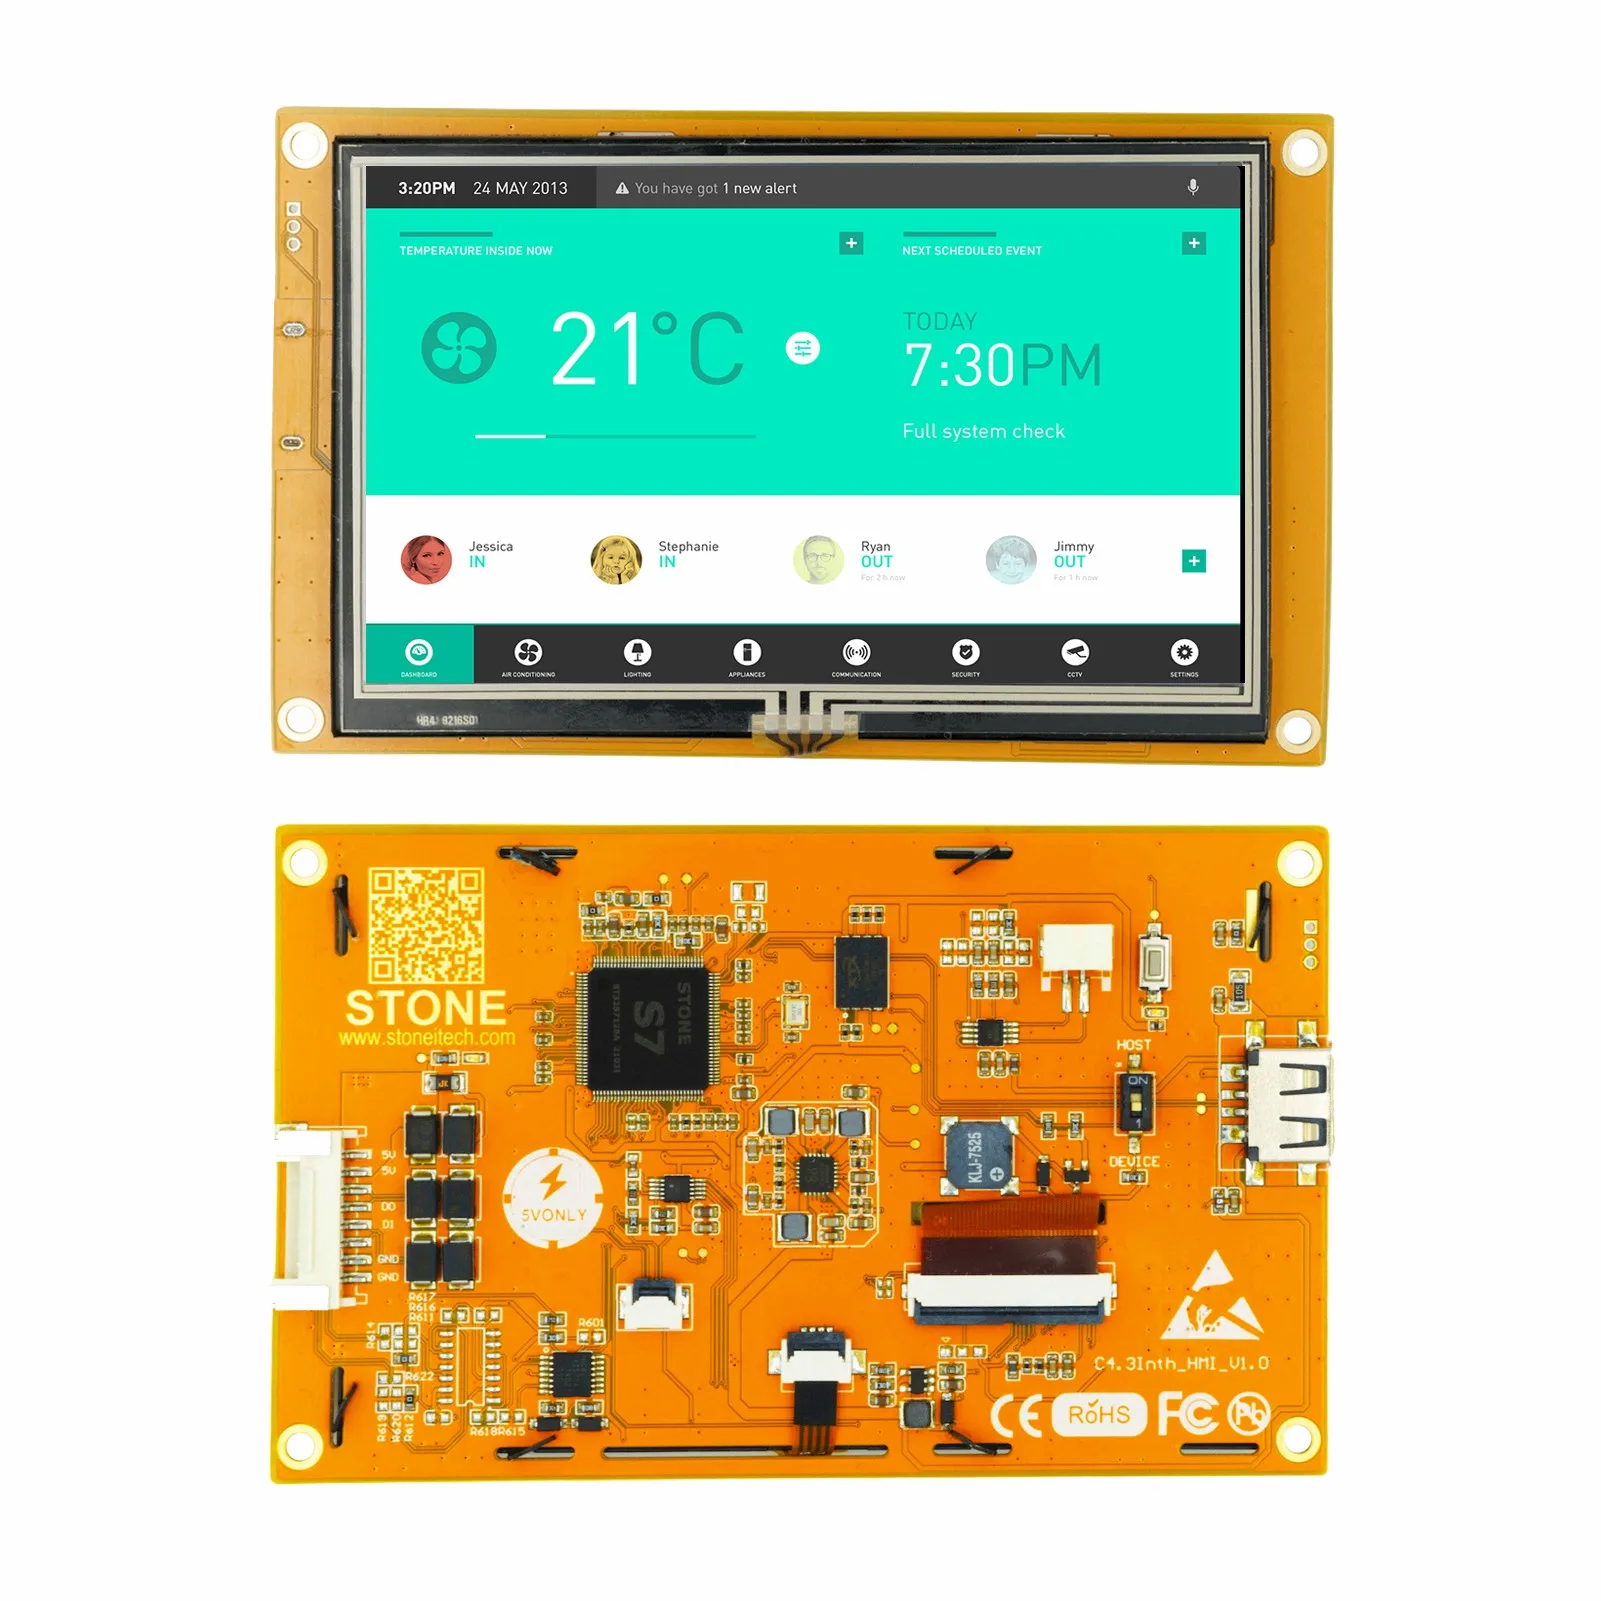 

SCBRHMI Smart HMI LCD Resistive Touch Display C Series Module Free Simulator Debug Support Assignment Operator